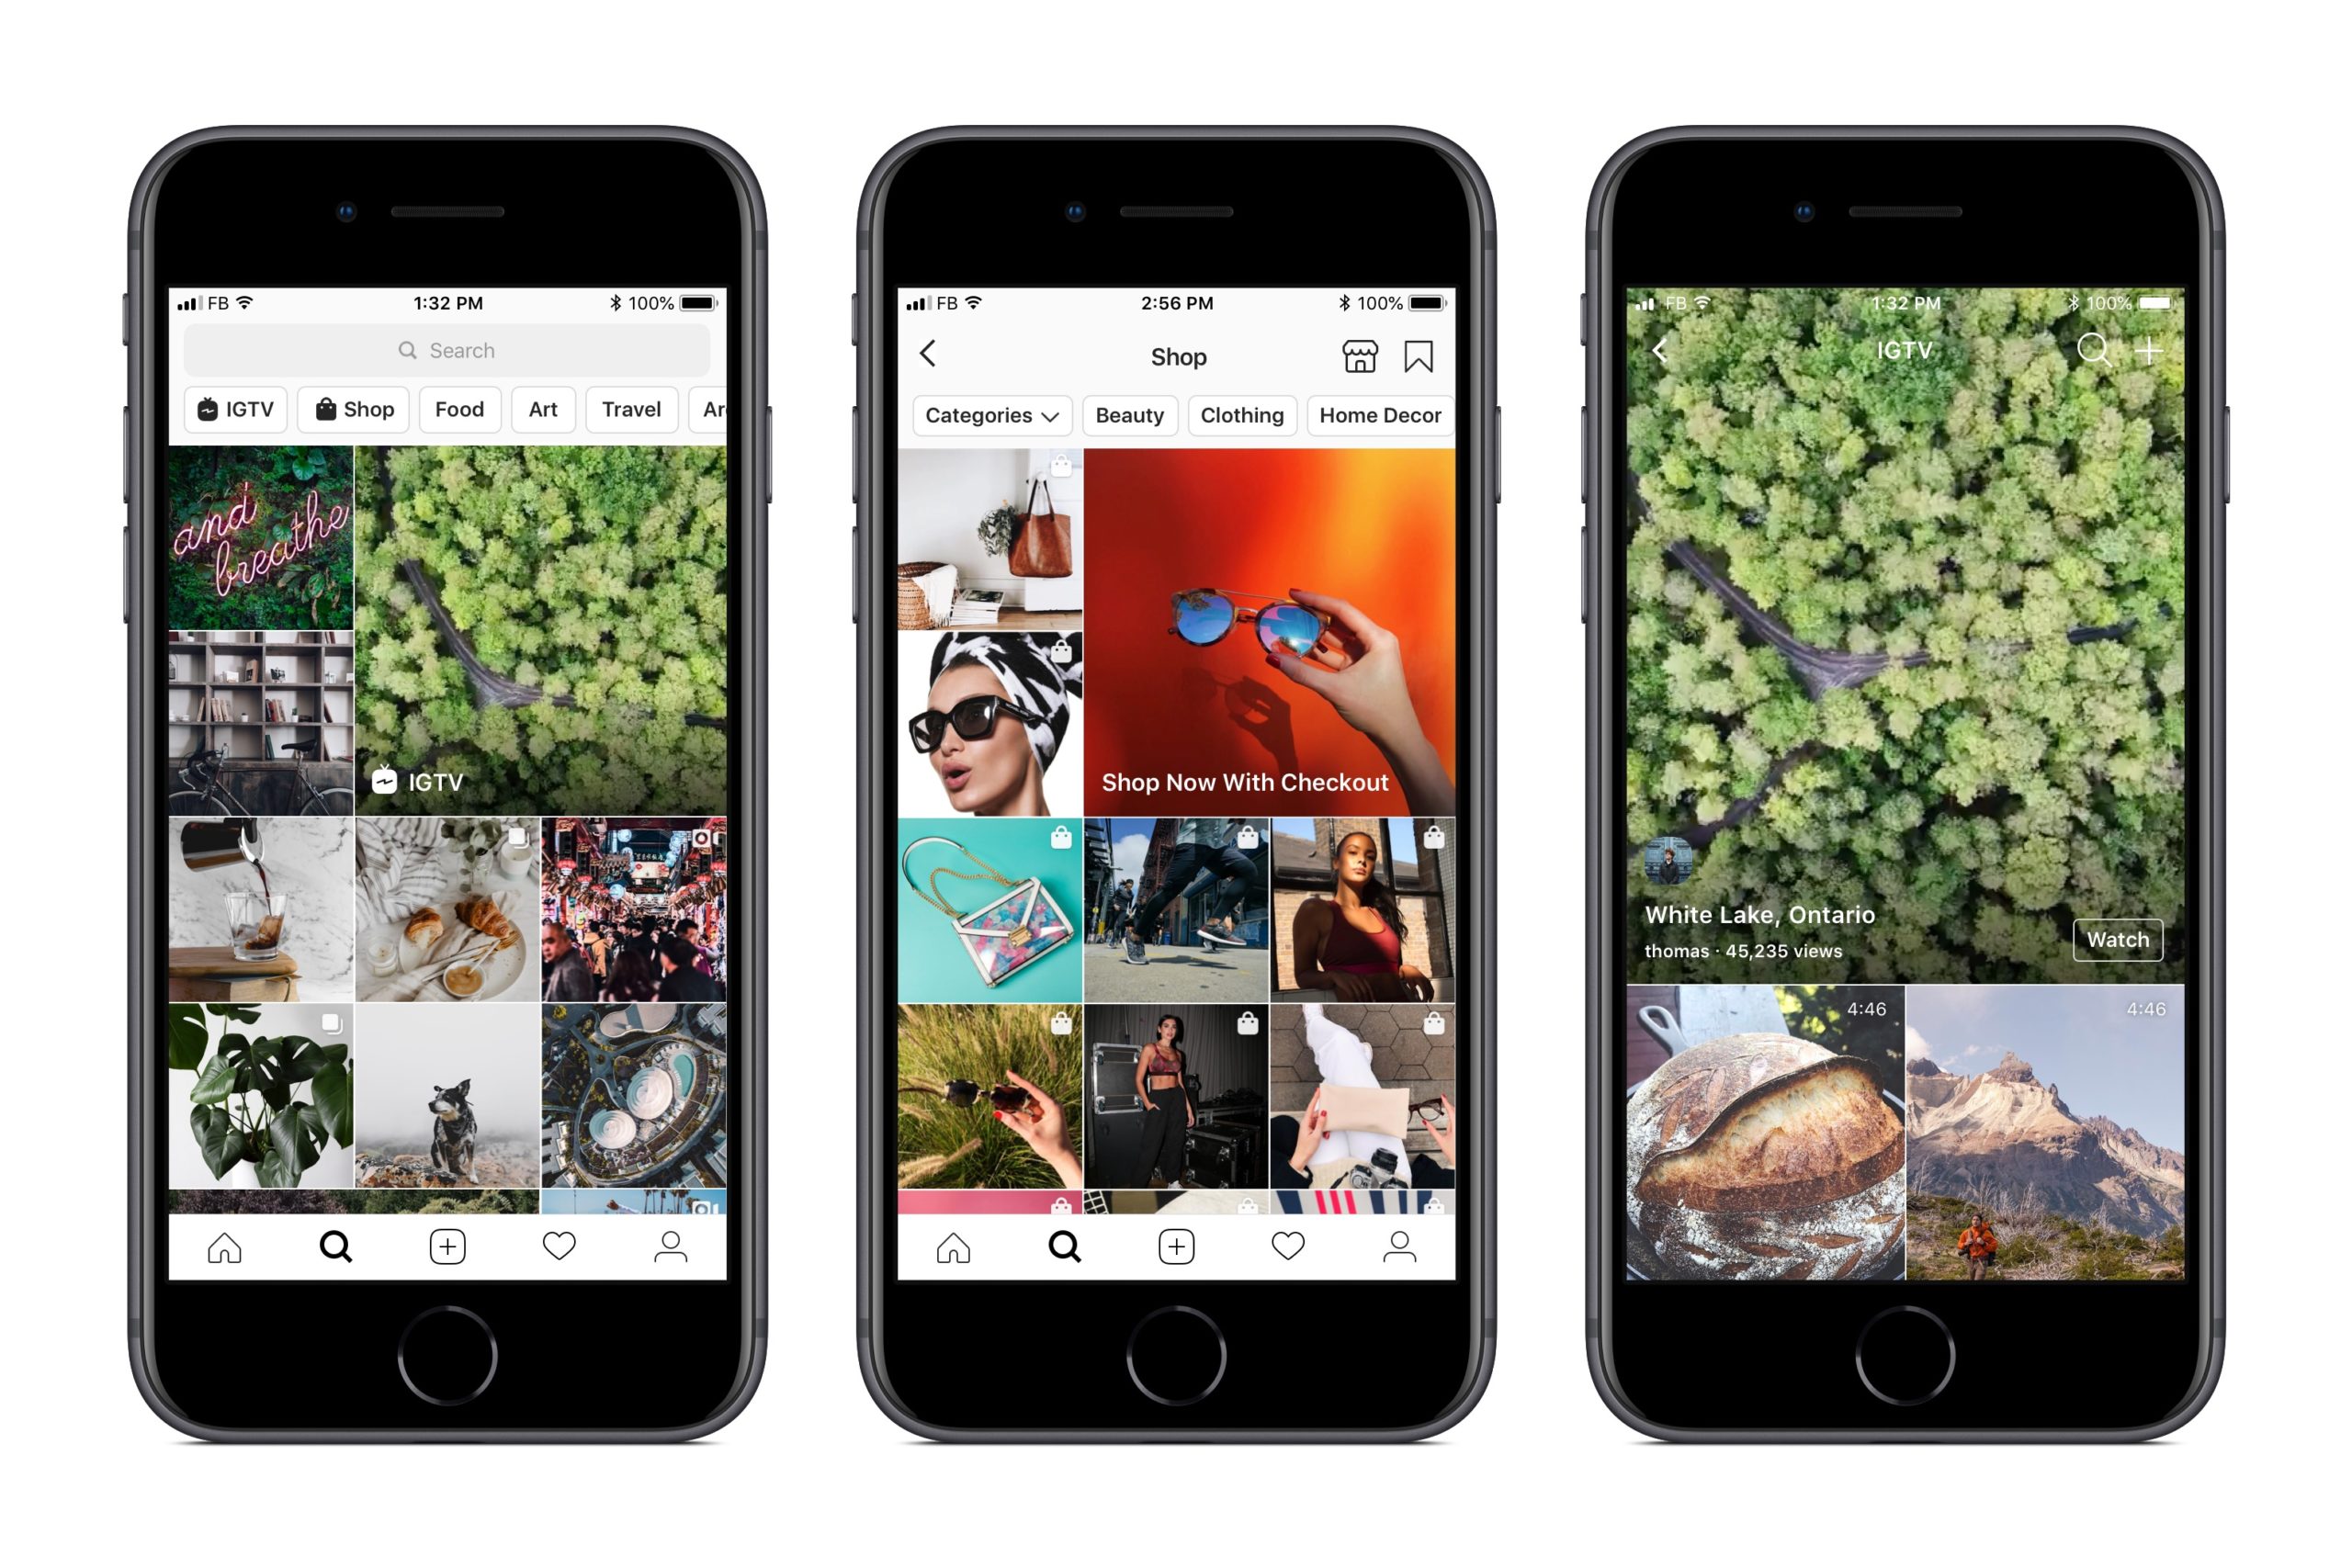 Instagram's Explore tab delivers a great shopping experience